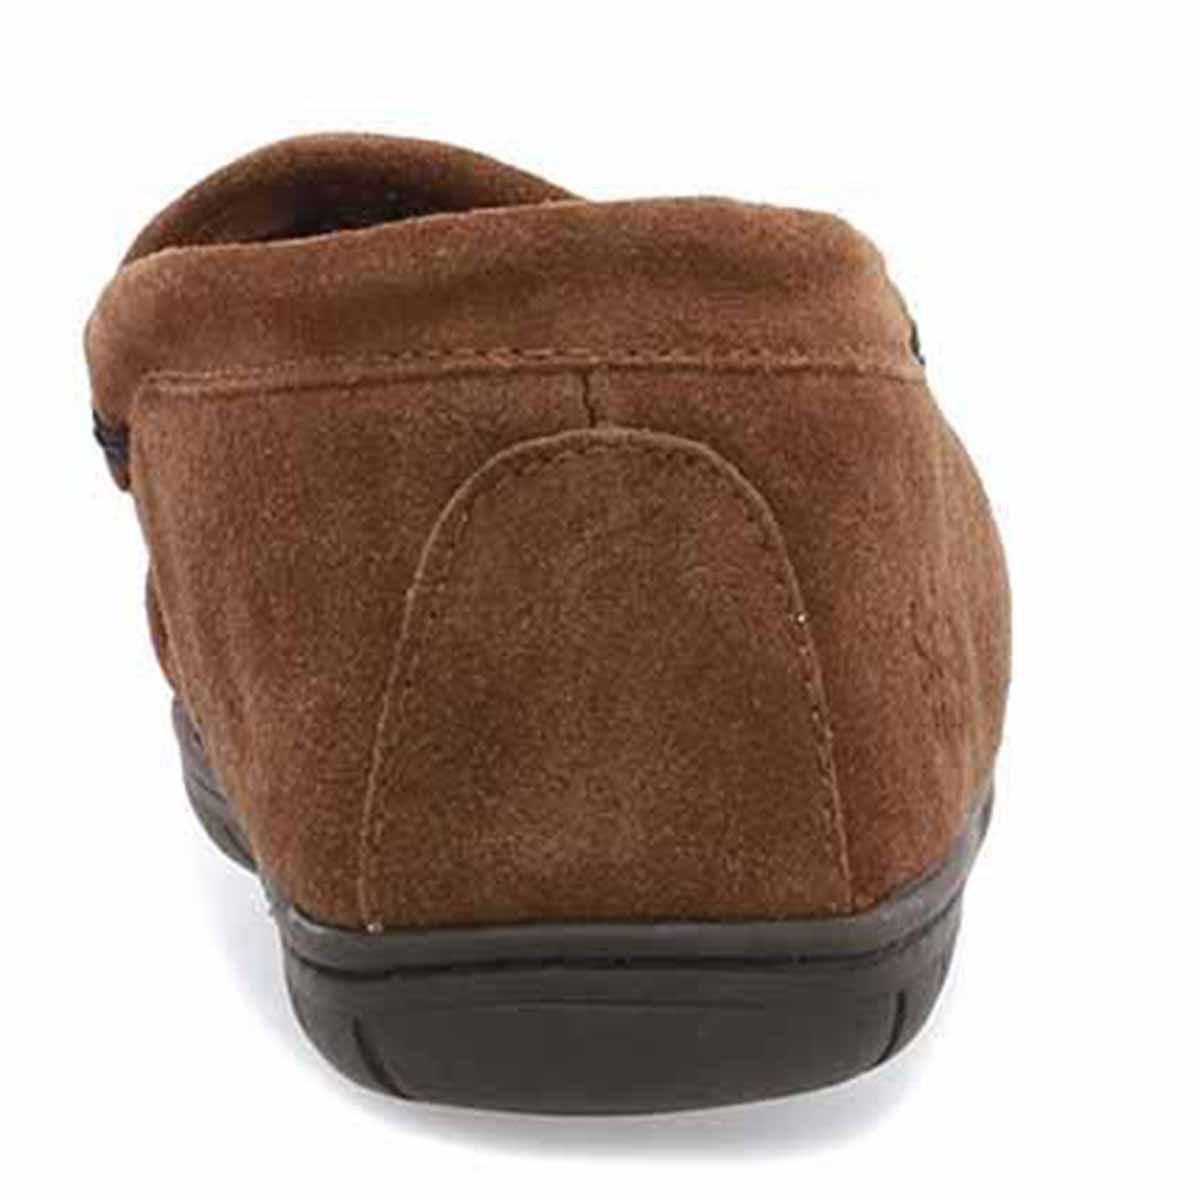 Rear view of a brown STAHEEKUM TRAPPER FLANNEL - MENS moc slip-on cow suede shoe by Staheekum with a dark sole, featuring a closed back and visible stitching details.